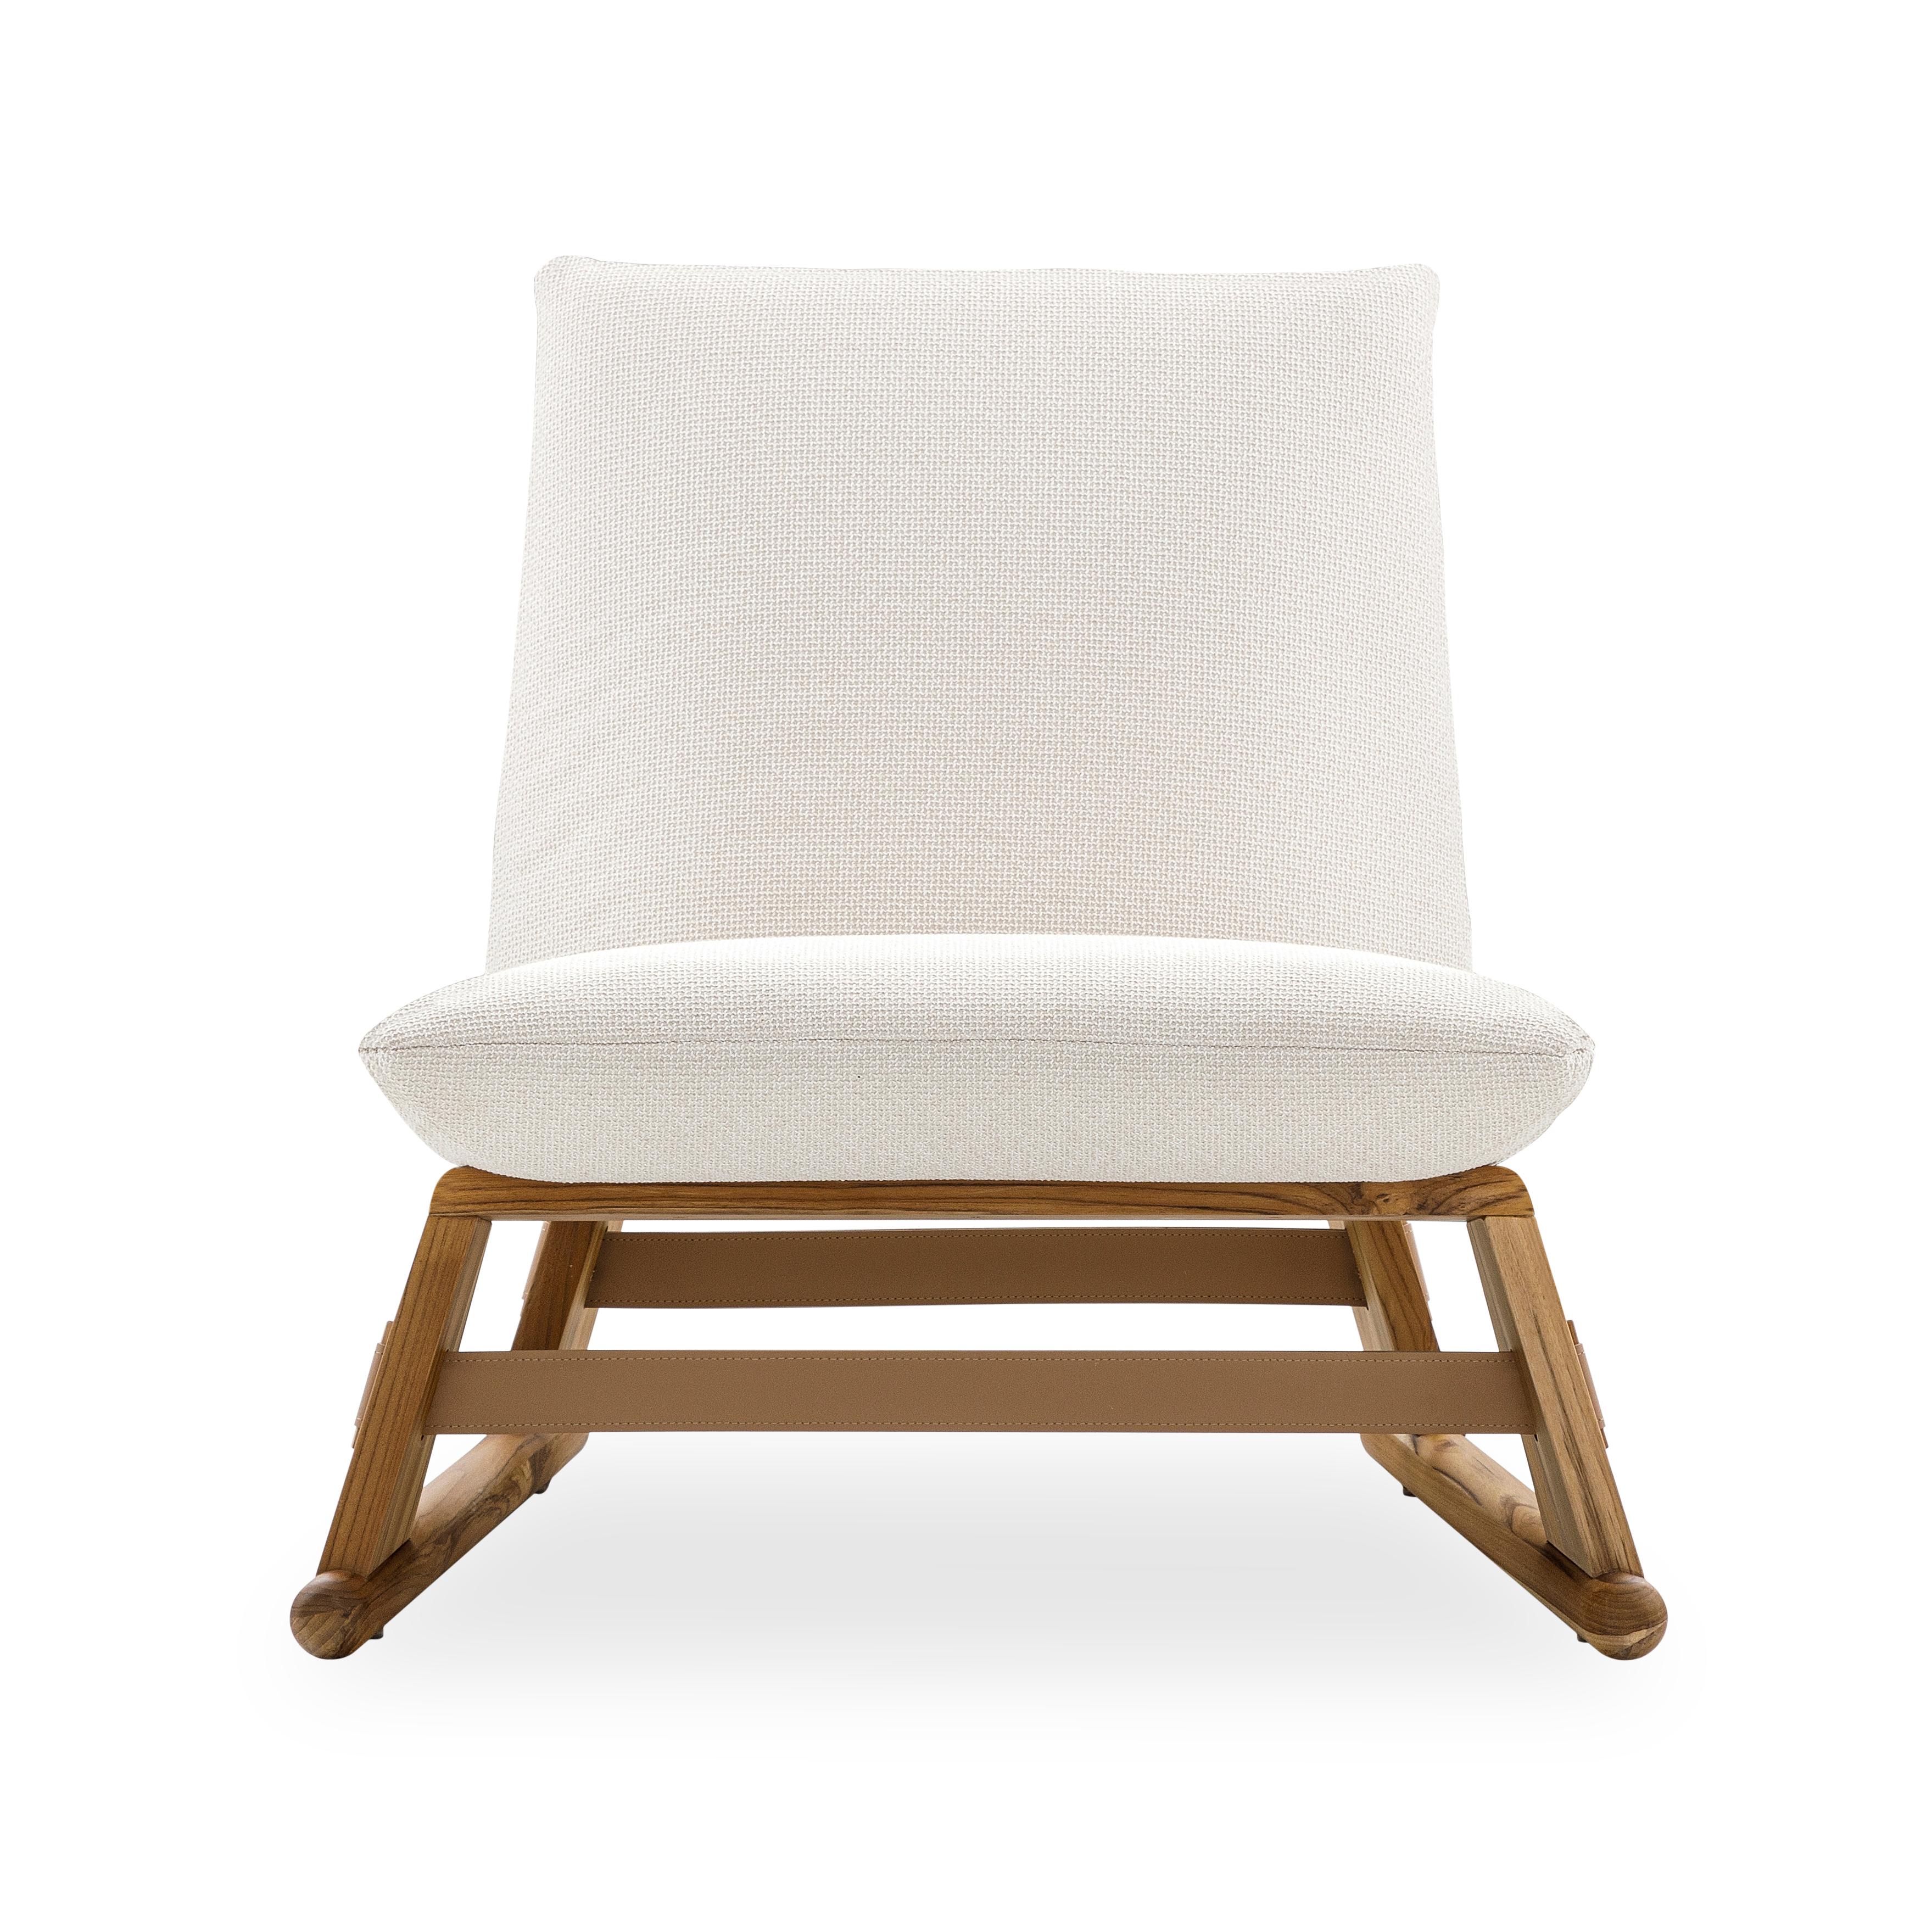 The Contemporary Maia chair is a new way to relax in its teak wood finish and the upholstered white fabric that covers it. The Uultis team has created this chair with a seat and backrest that are made of MDF, it has elastic straps and a